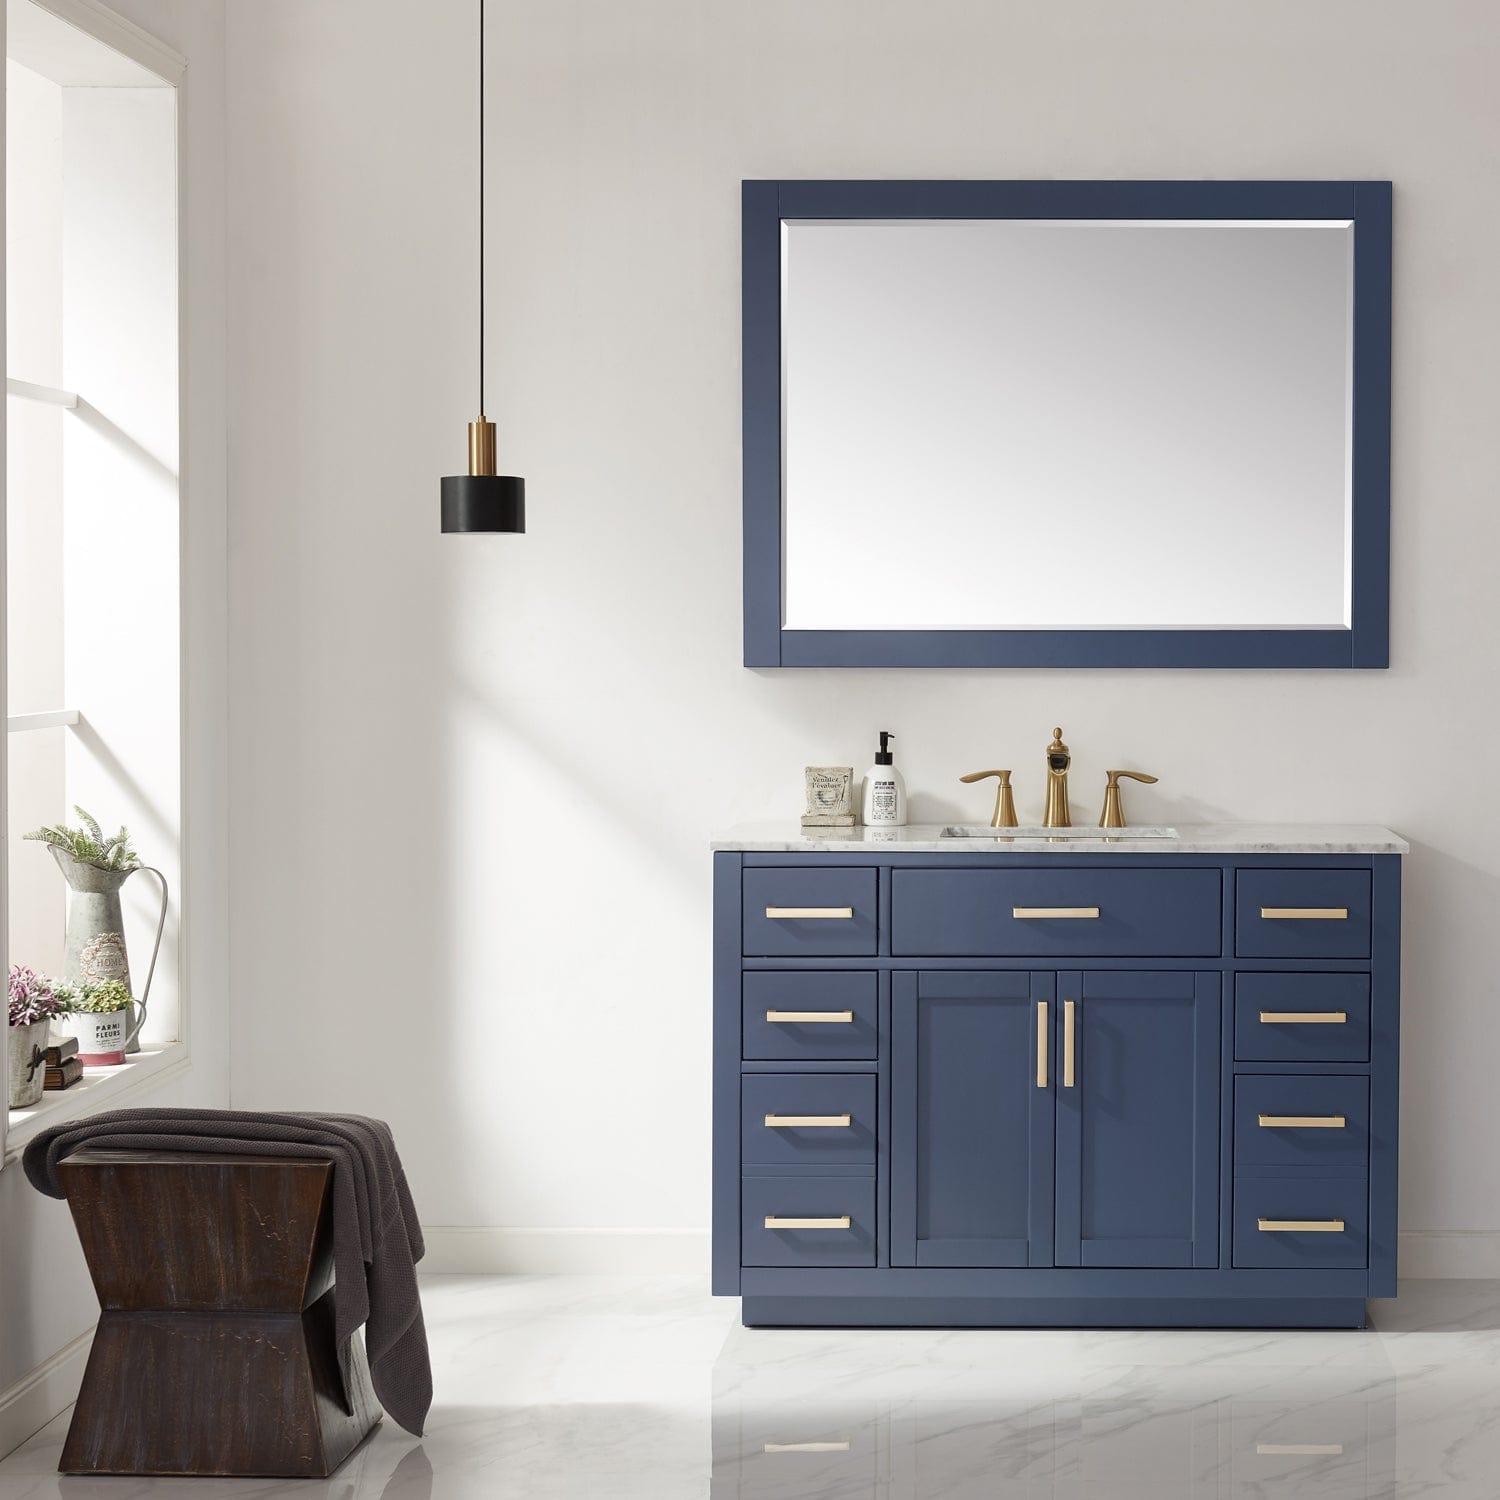 Altair Ivy 48" Single Bathroom Vanity Set in Royal Blue and Carrara White Marble Countertop with Mirror 531048-RB-CA - Molaix631112971171Vanity531048-RB-CA